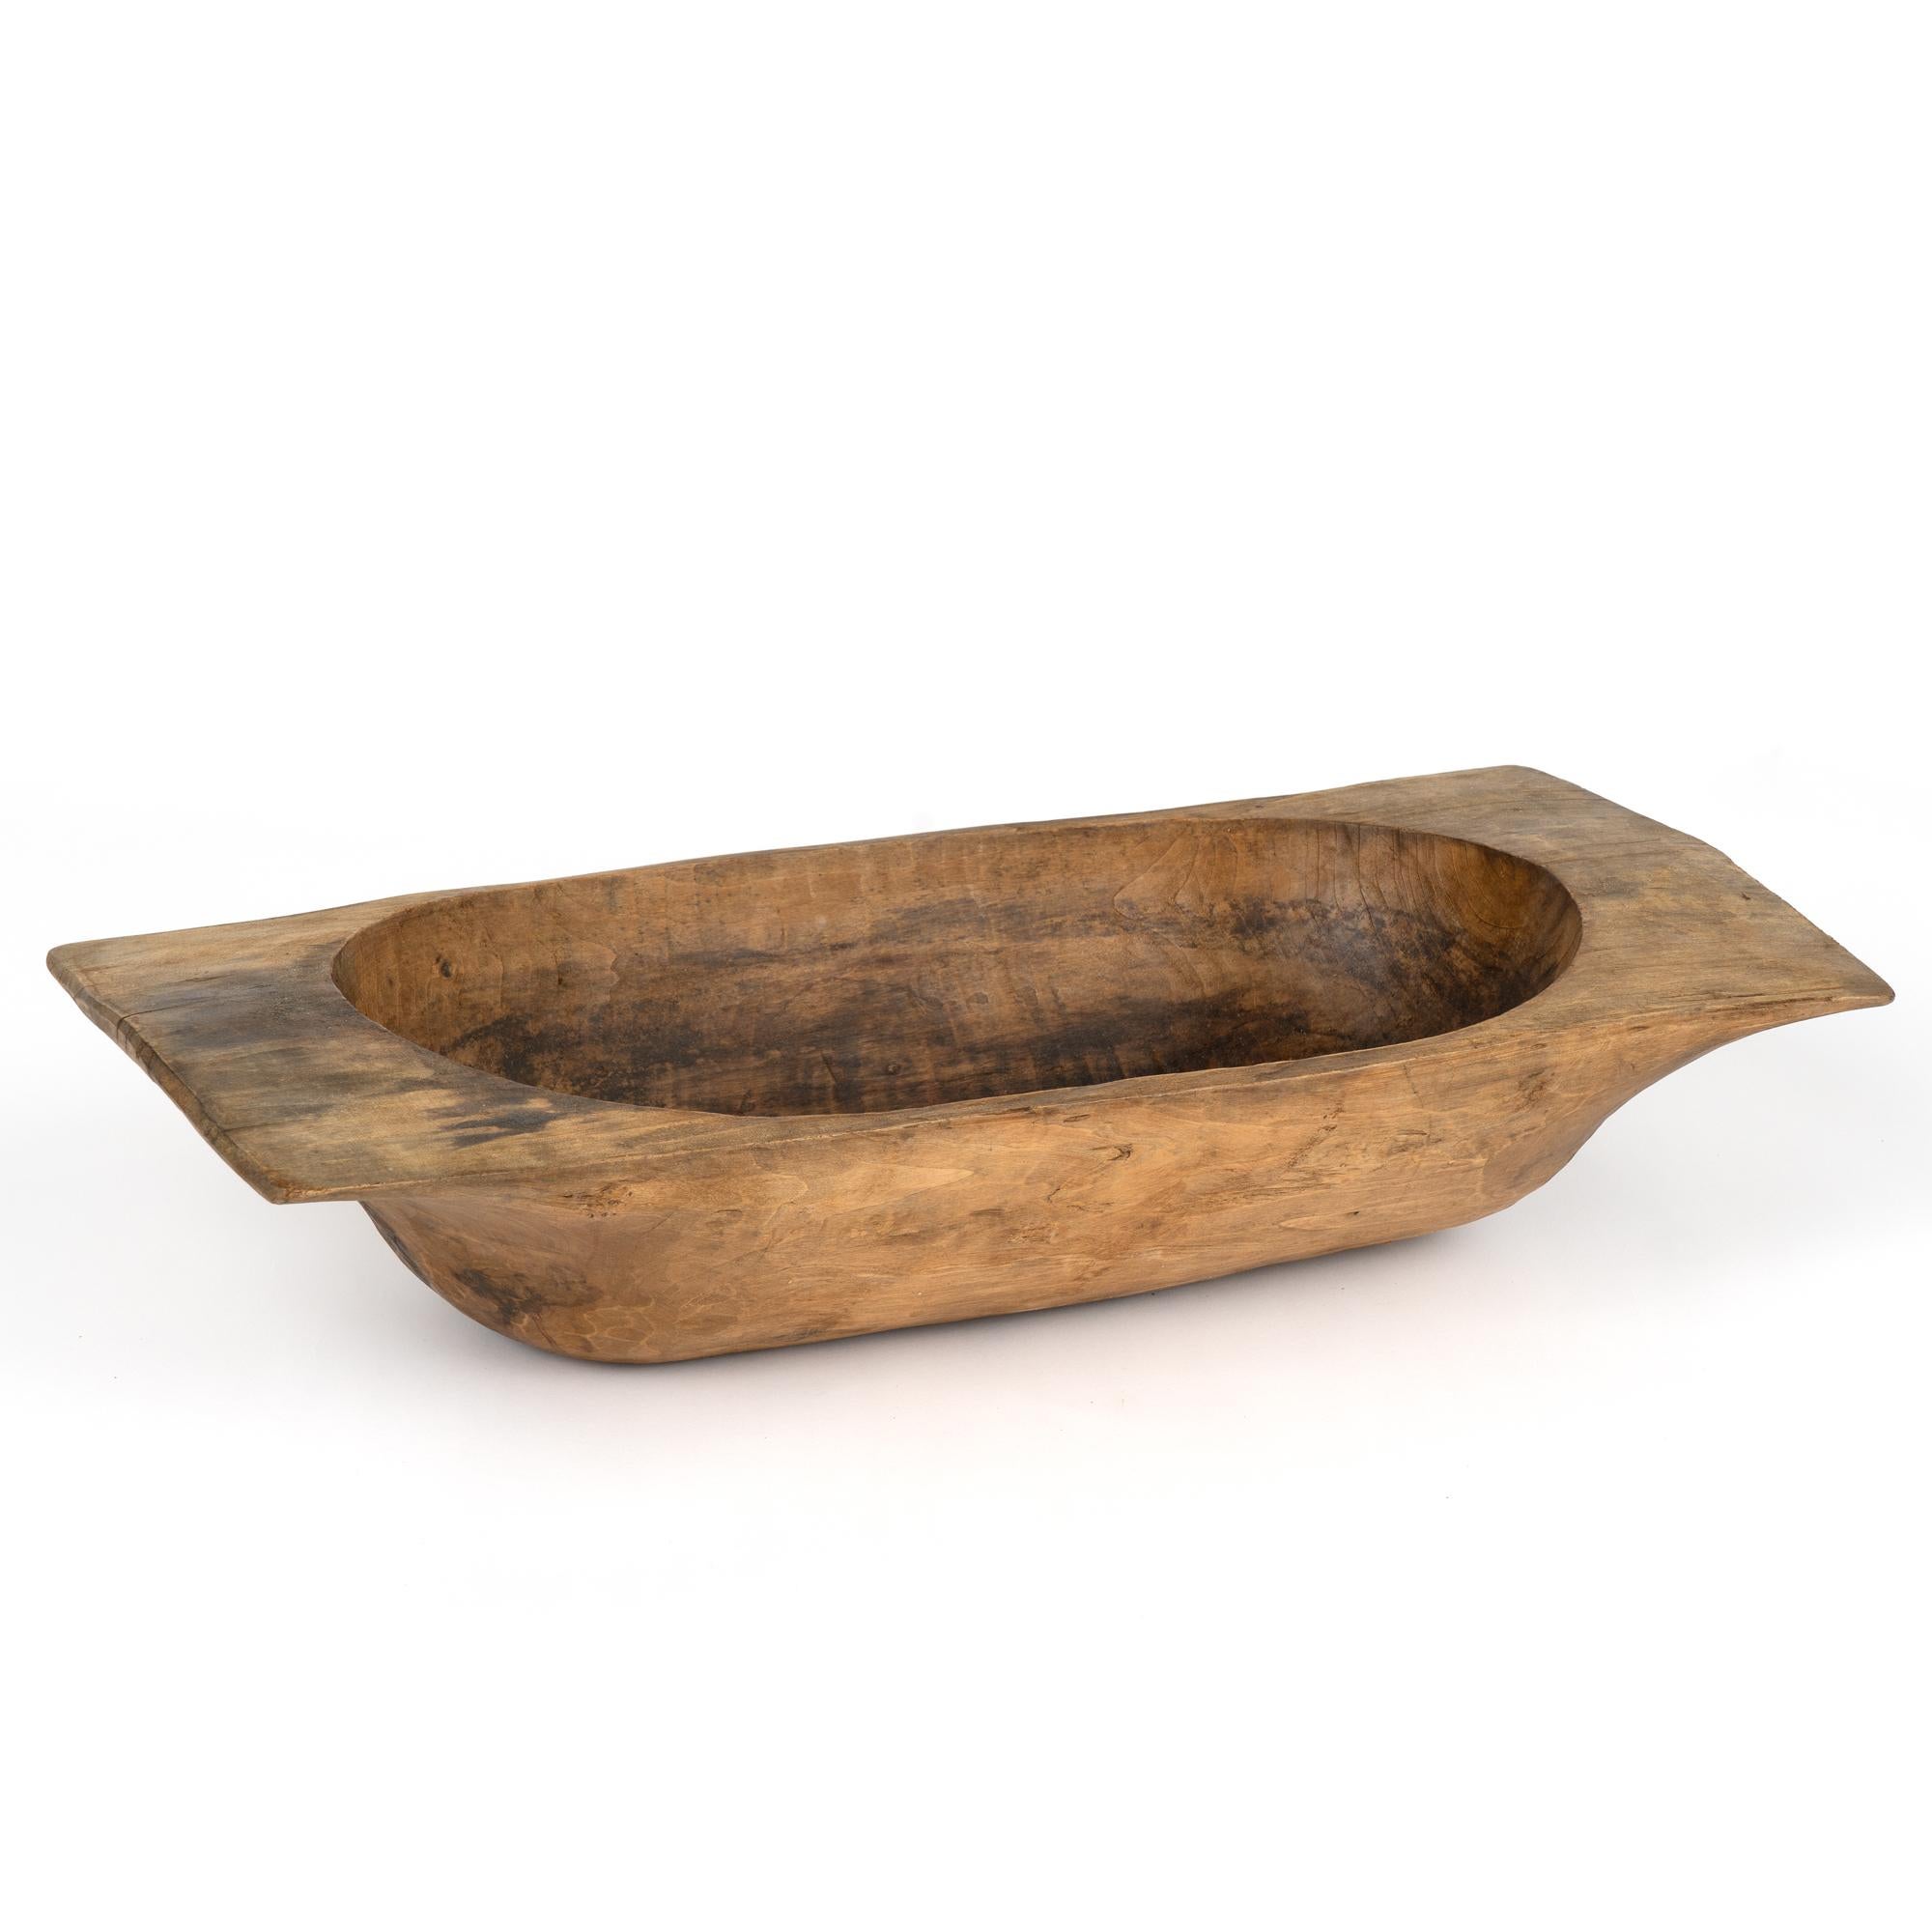 Antique, hand hewn, European country dough bowl / trencher featuring a rounded rectangular shape, tapered base and handles.
Old cracks, nicks, stains, distress are reflective of generations of use. 
Waxed and ready to use as decorative bowl.

With